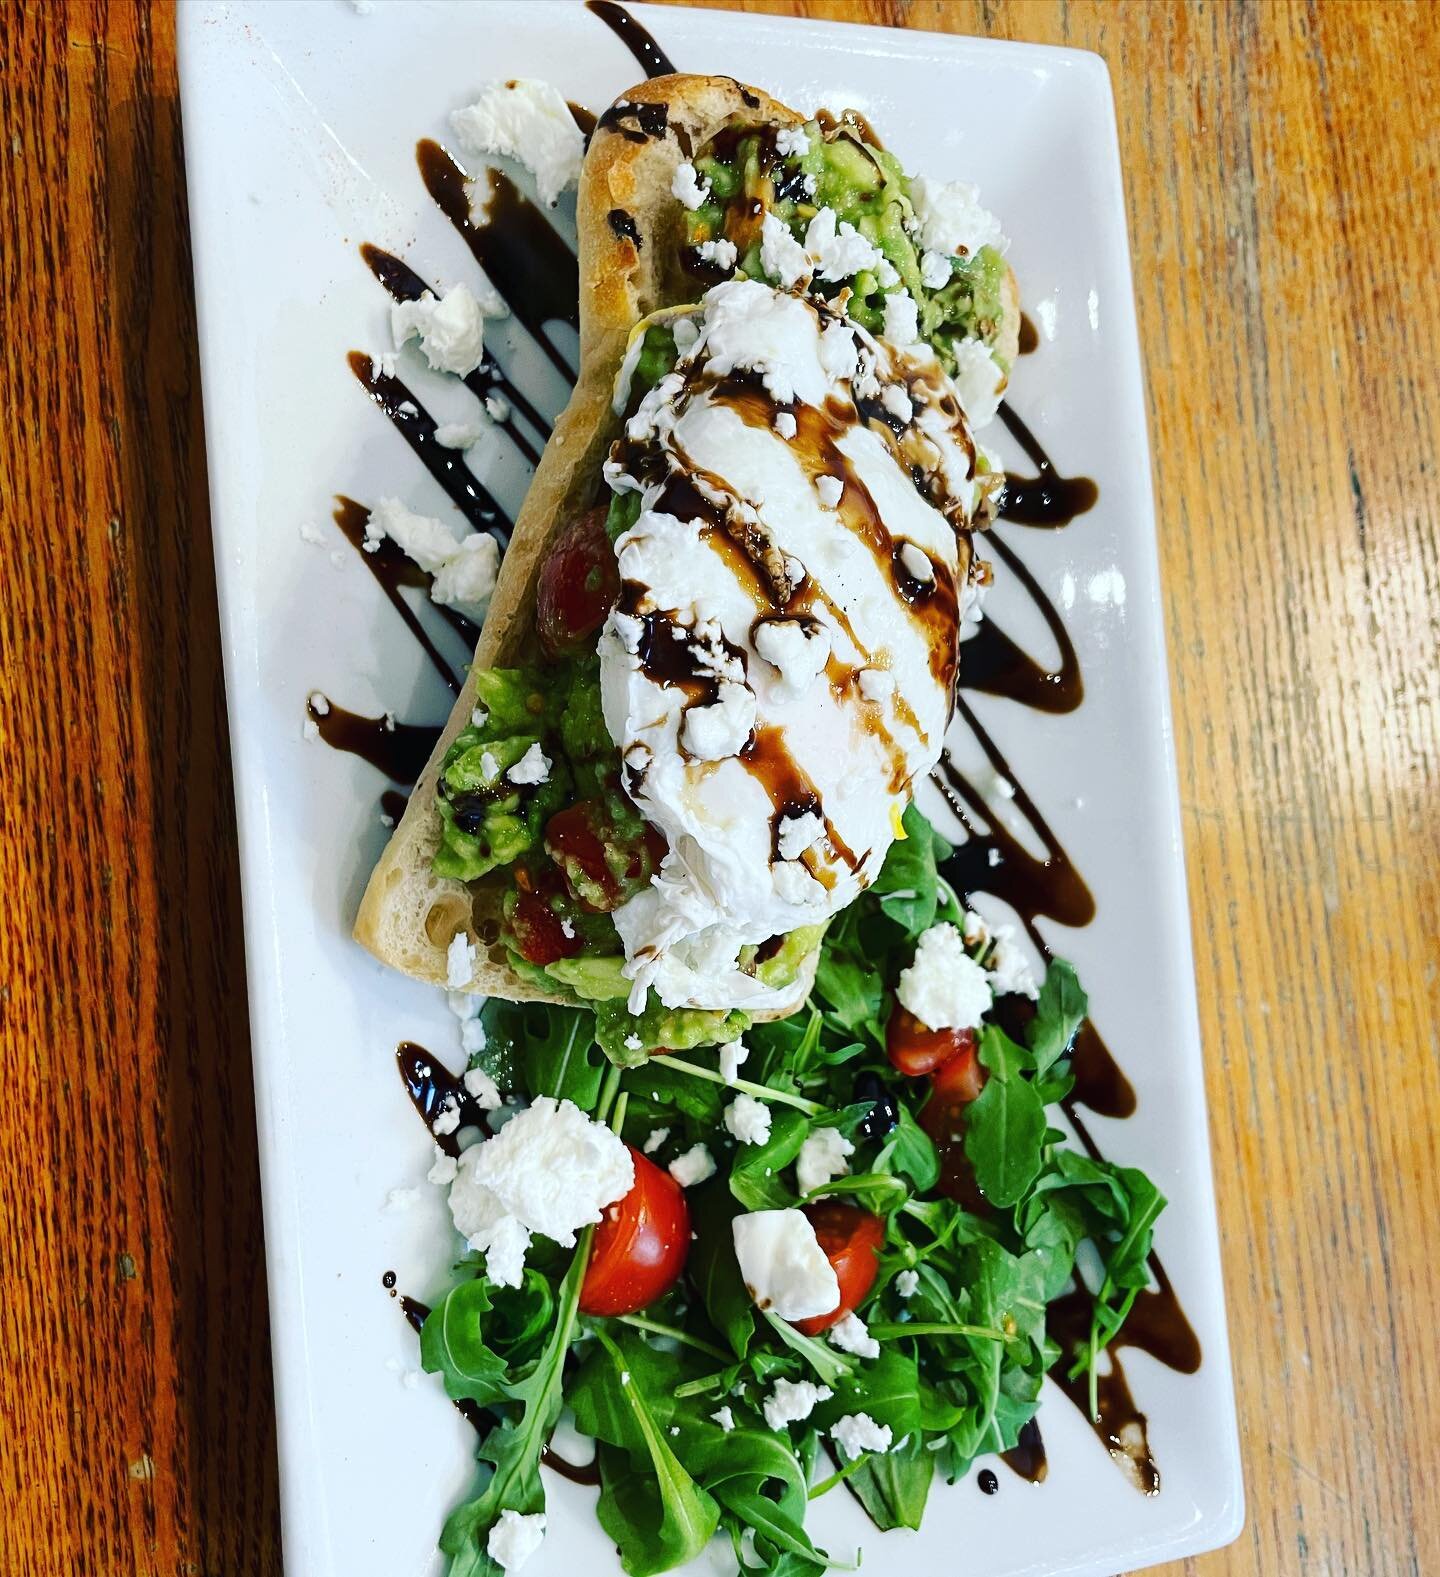 Toasted ciabatta with smashed avocado, cherry tomatoes, feta cheese &amp; chilli jam poached egg is optional.

#foodie #restaurant #eveningscomingsoon #eatclean #diet #bromley #foodstagram #poached #eggs #avocado #avocadotoast #bromley